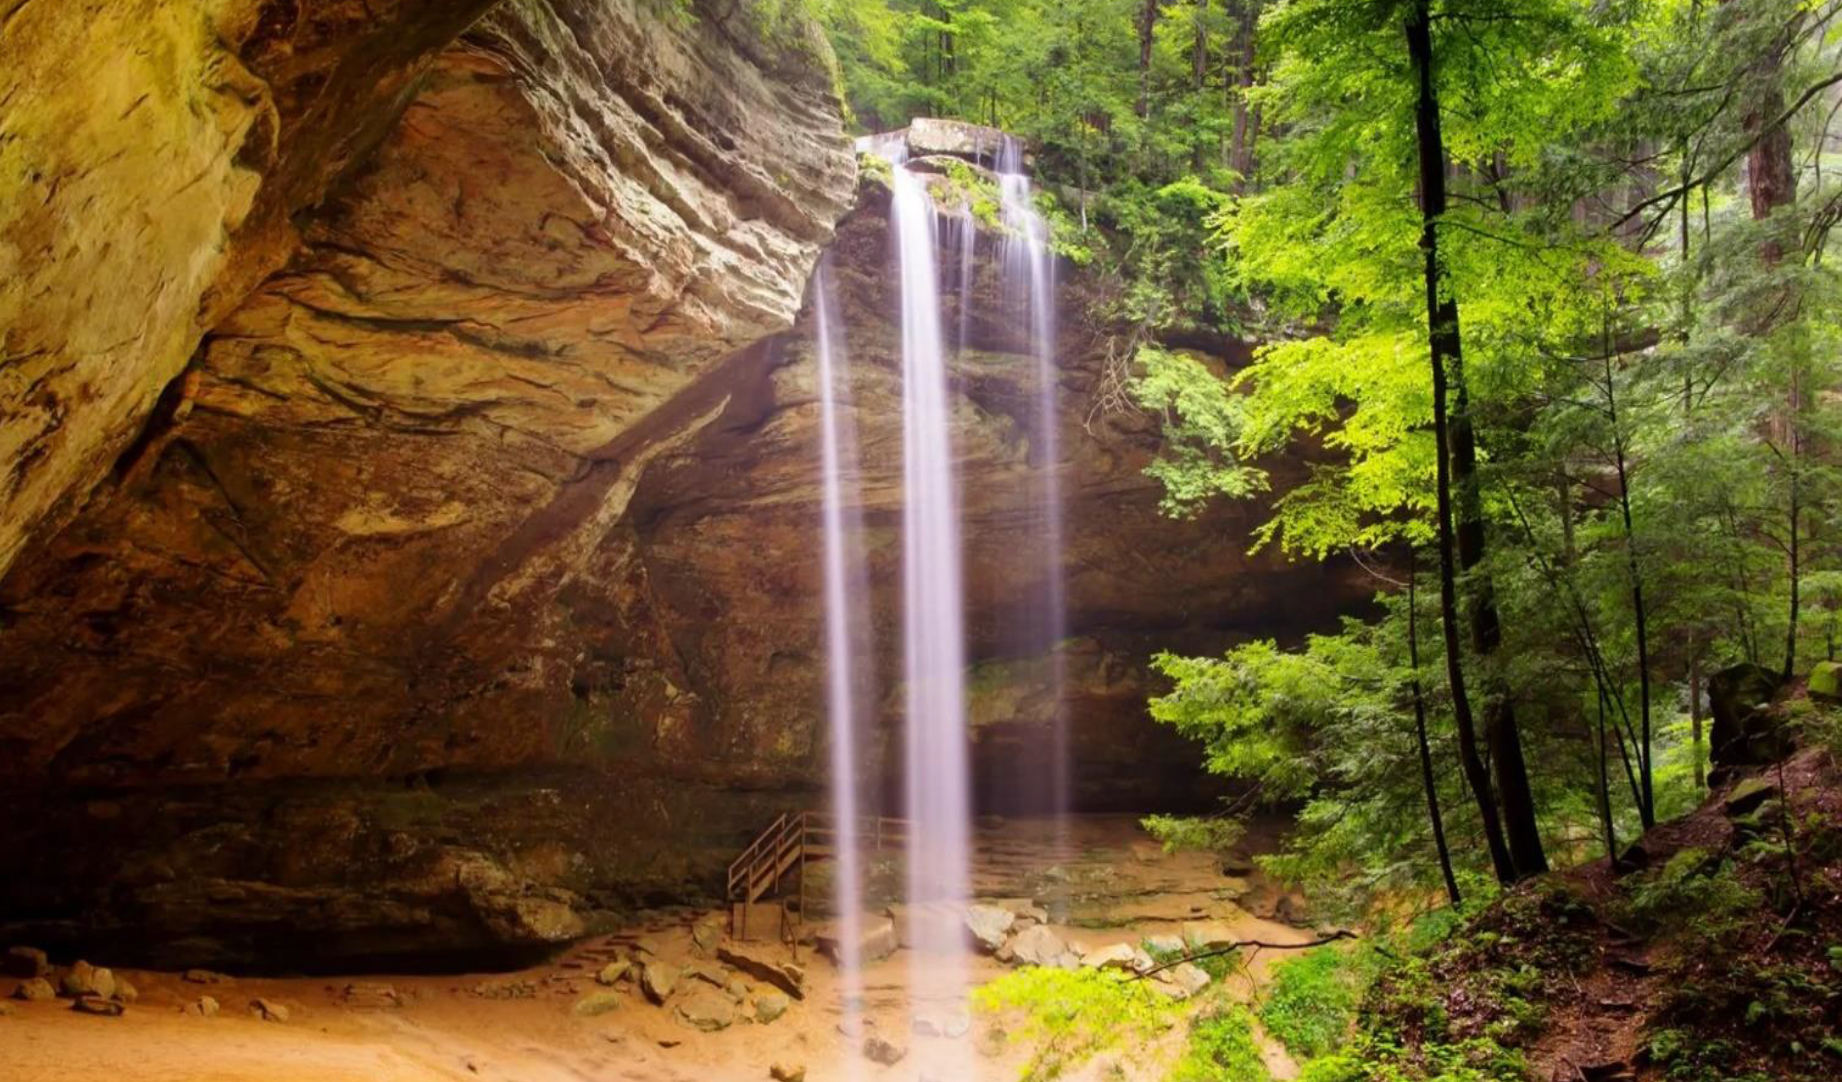 Hocking Hills offers ideal tourist destination during pandemic, SBDC